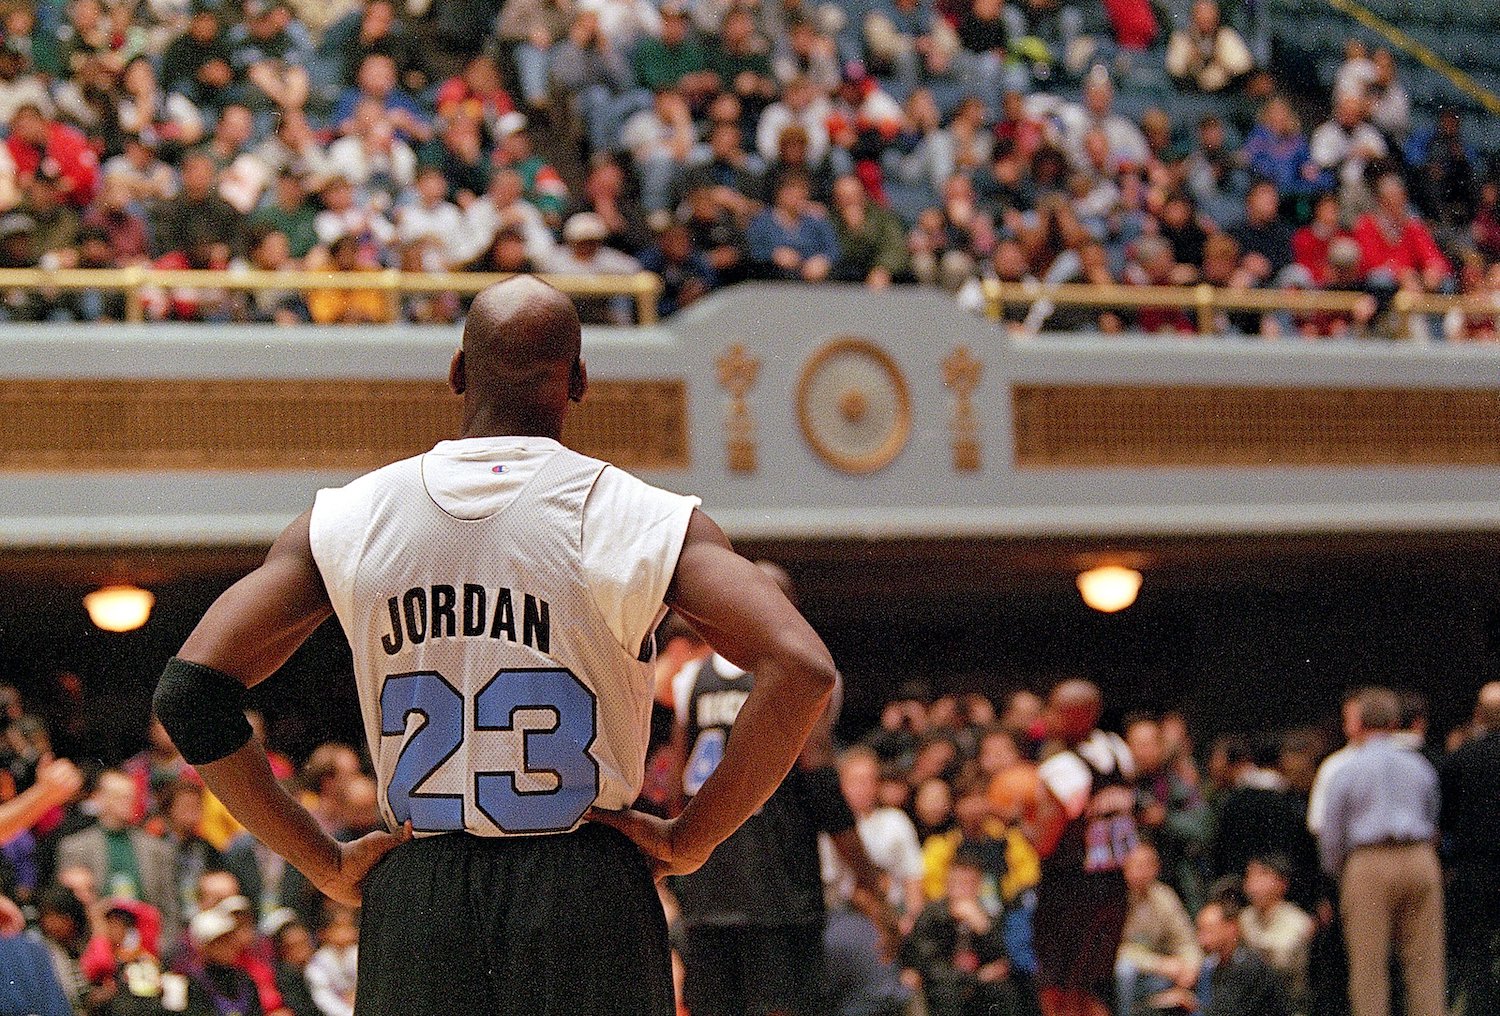 LOOK: Michael Jordan at the All-Star Game through the years